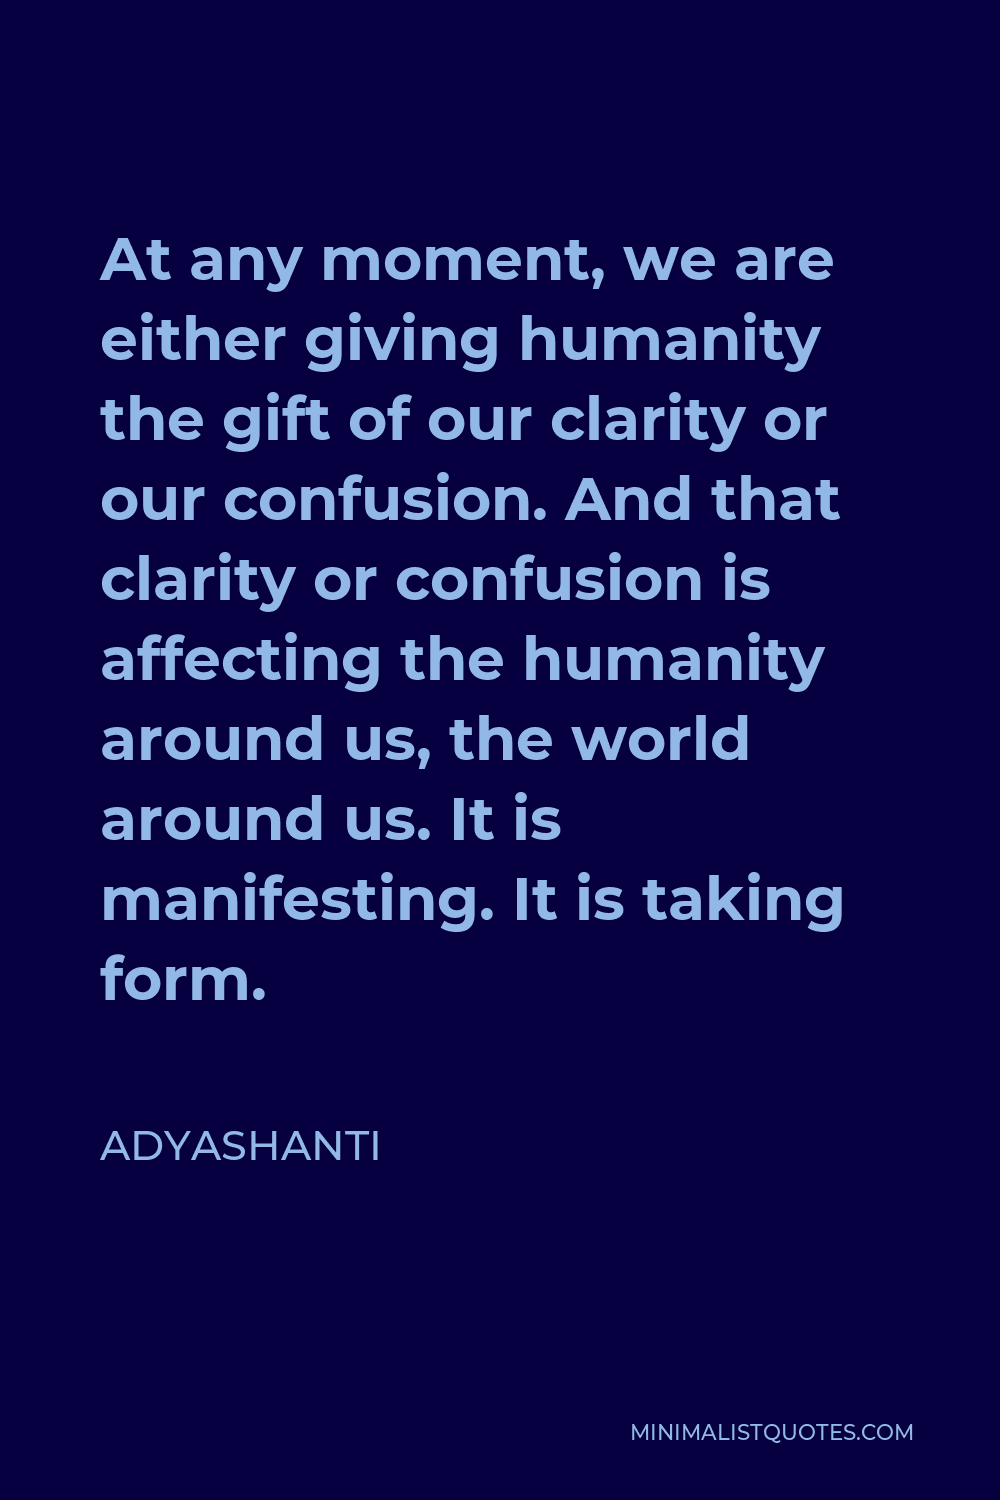 Adyashanti Quote - At any moment, we are either giving humanity the gift of our clarity or our confusion. And that clarity or confusion is affecting the humanity around us, the world around us. It is manifesting. It is taking form.